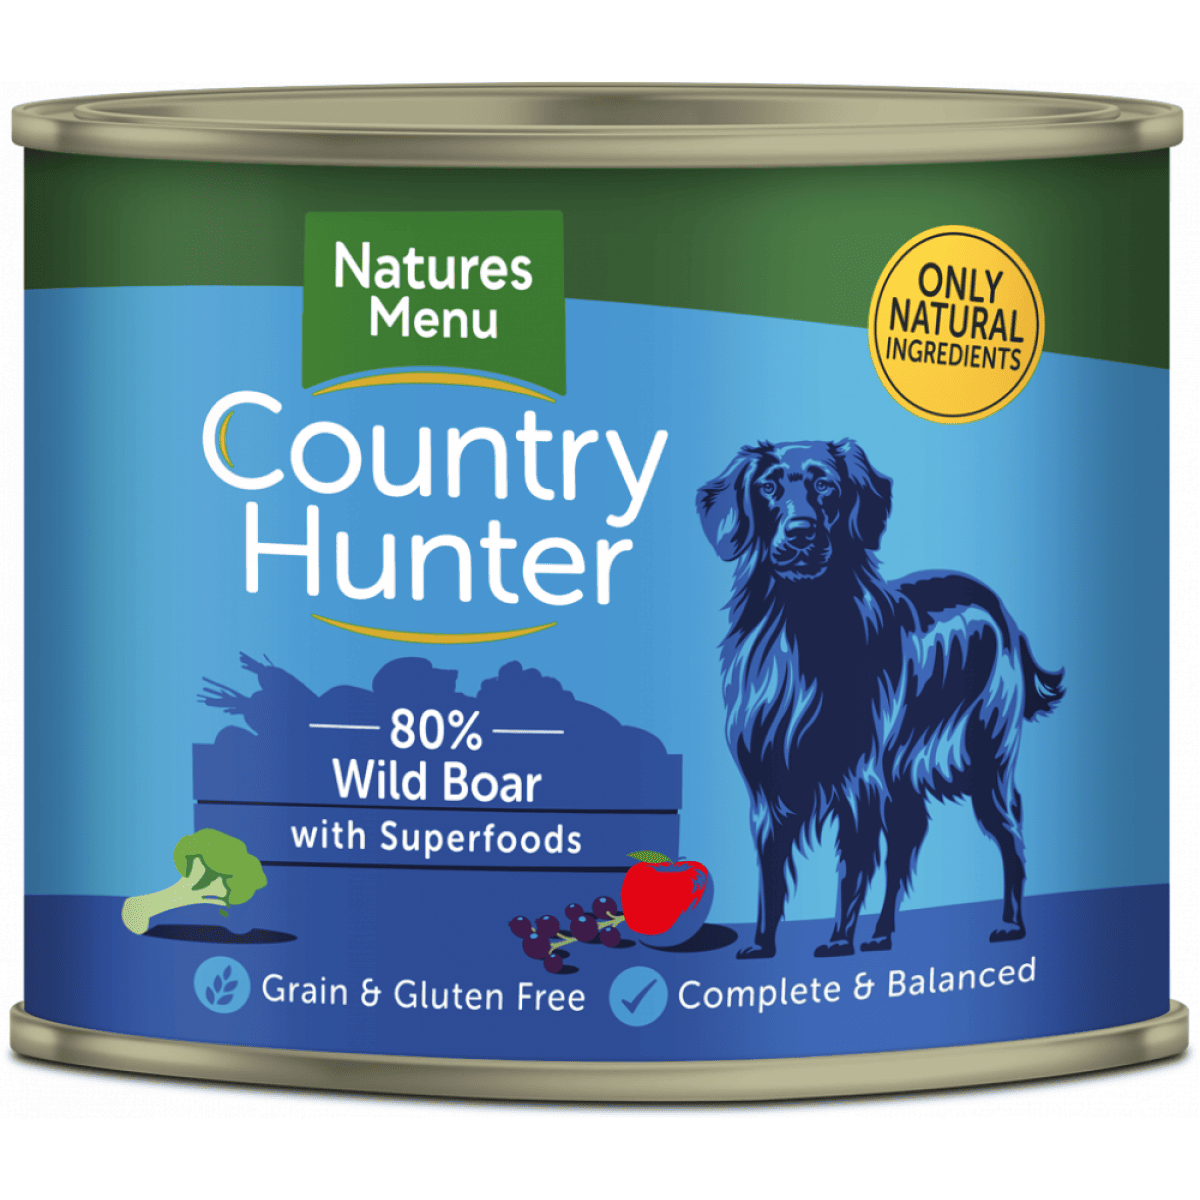 Country Hunter 80% Wild Boar 600g – Pawfect Supplies Ltd Product Image